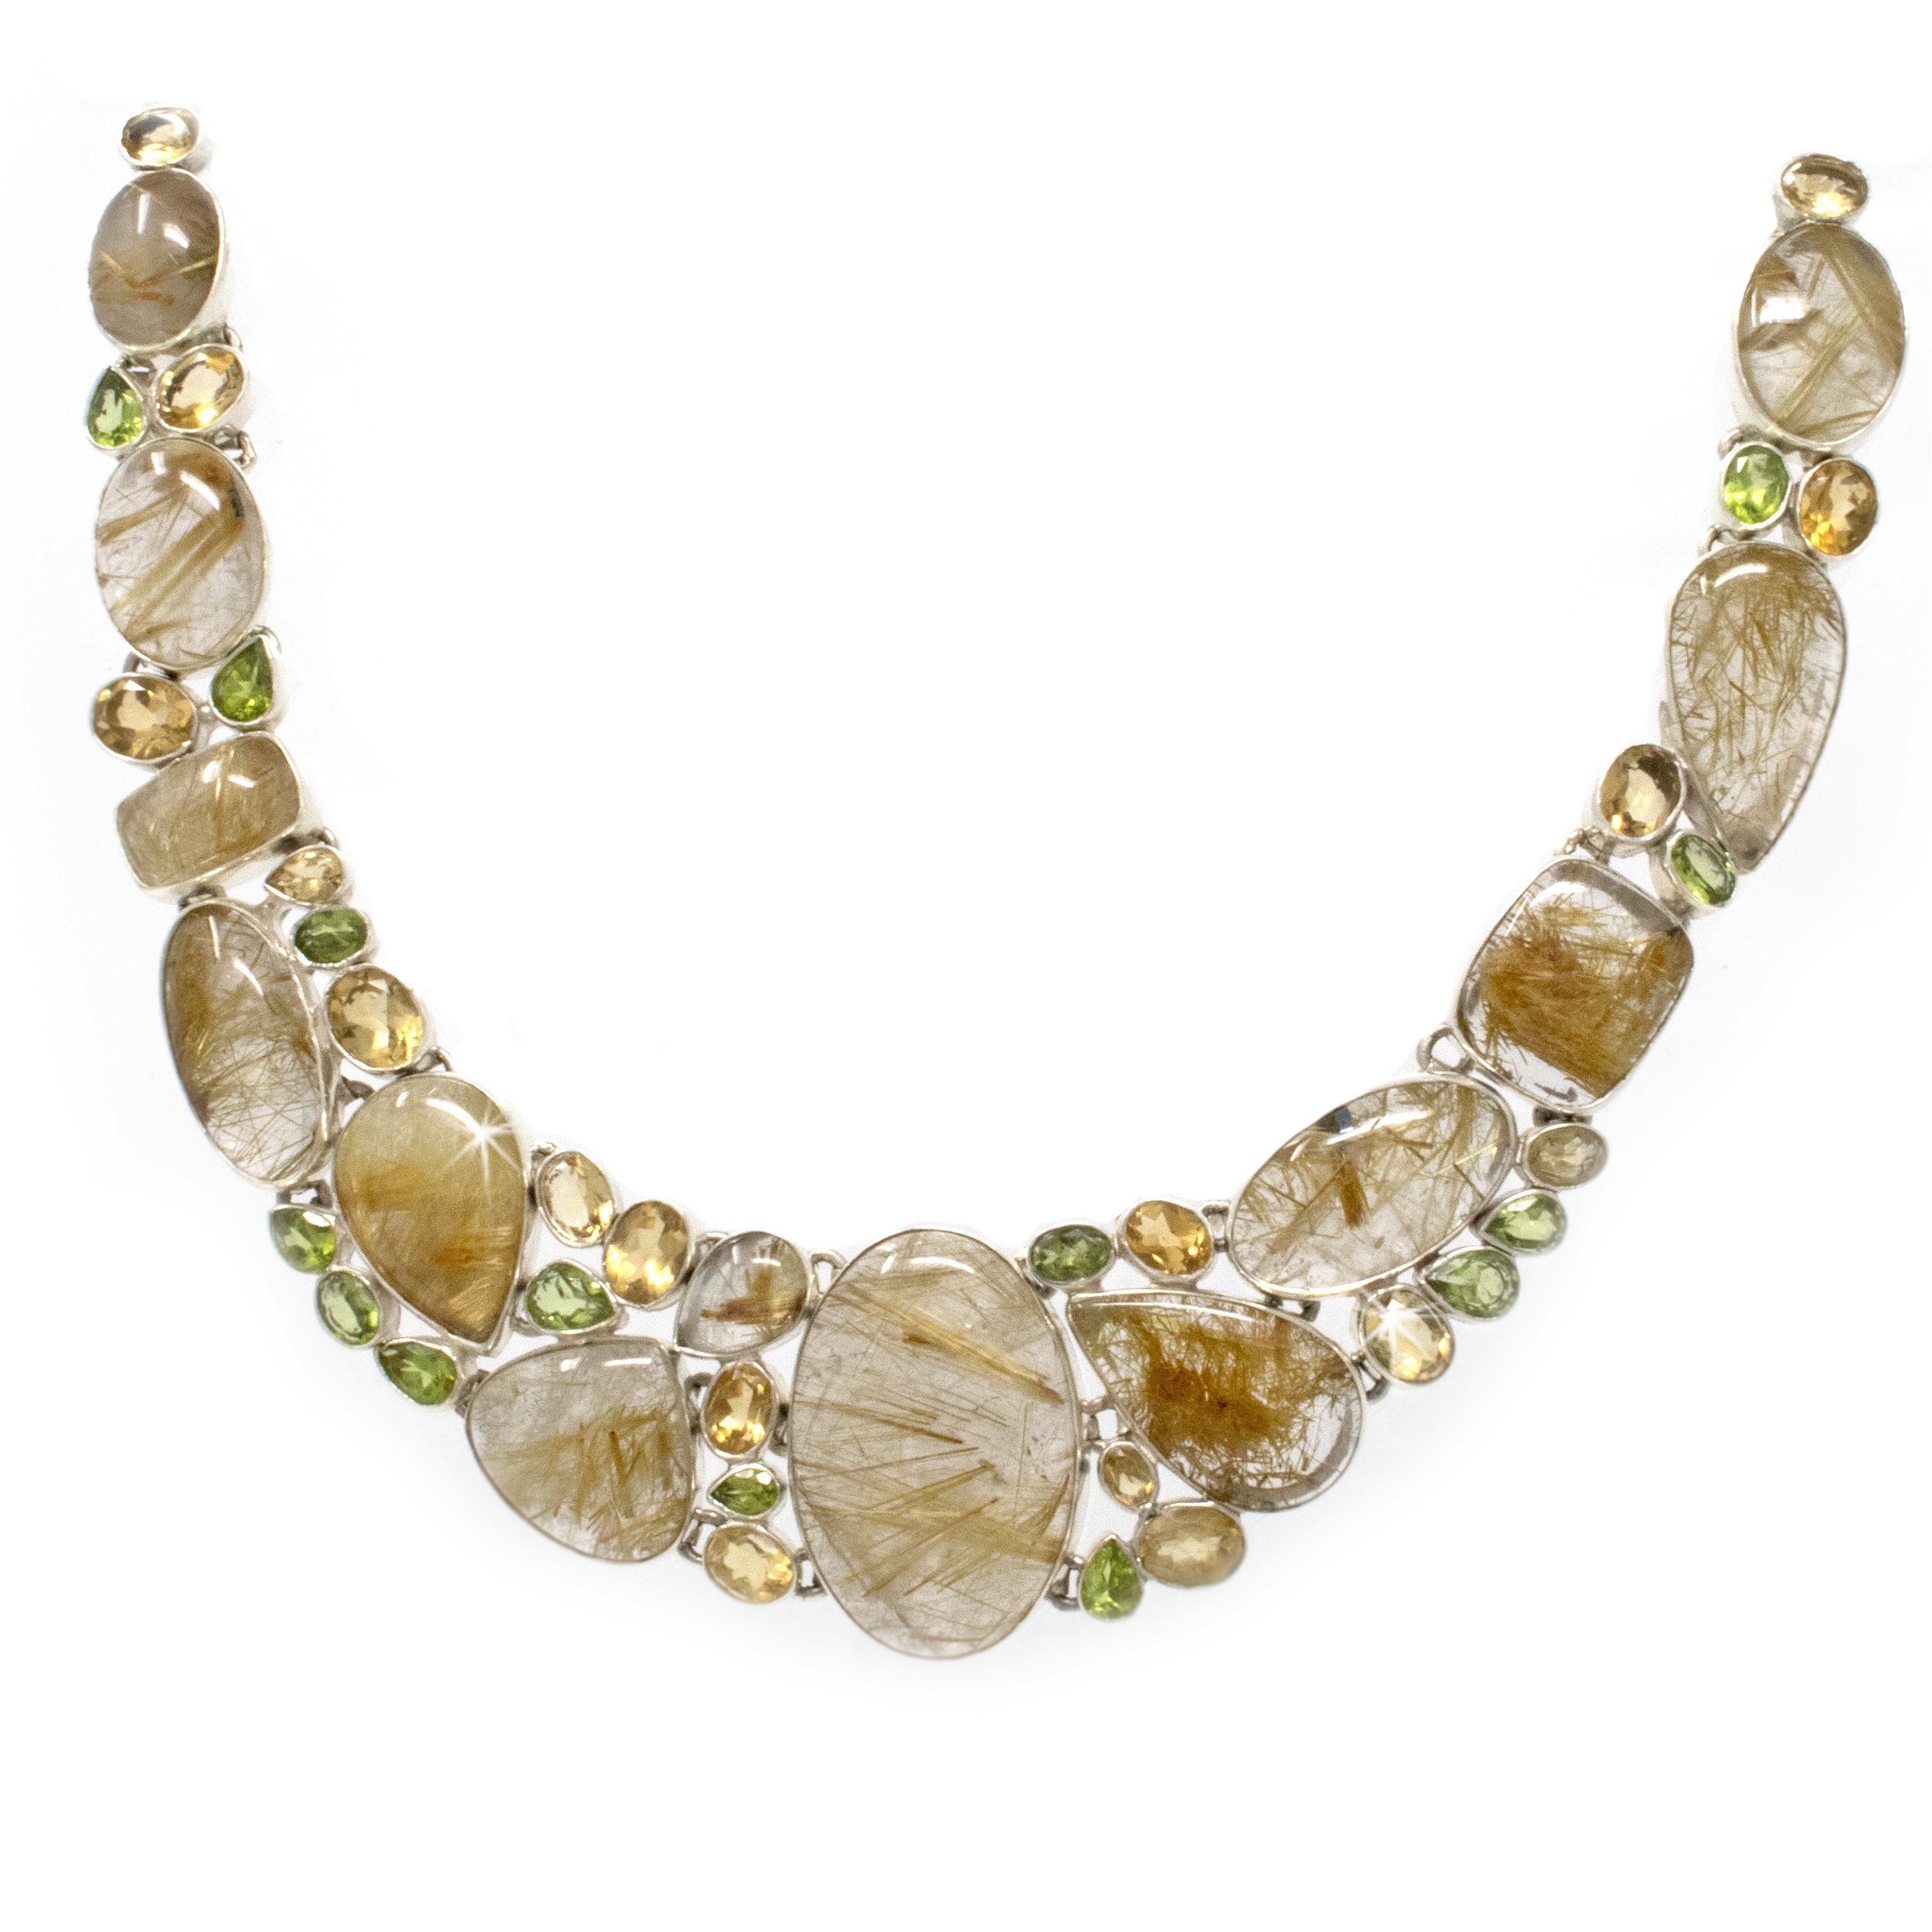 Golden Rutile Quartz Necklace With Faceted Citrine & Peridot - Large Geometric Cabochons With Matrix Of Faceted Peridot & Citrine With Silver Bezels & Adjustable Toggle Clasp